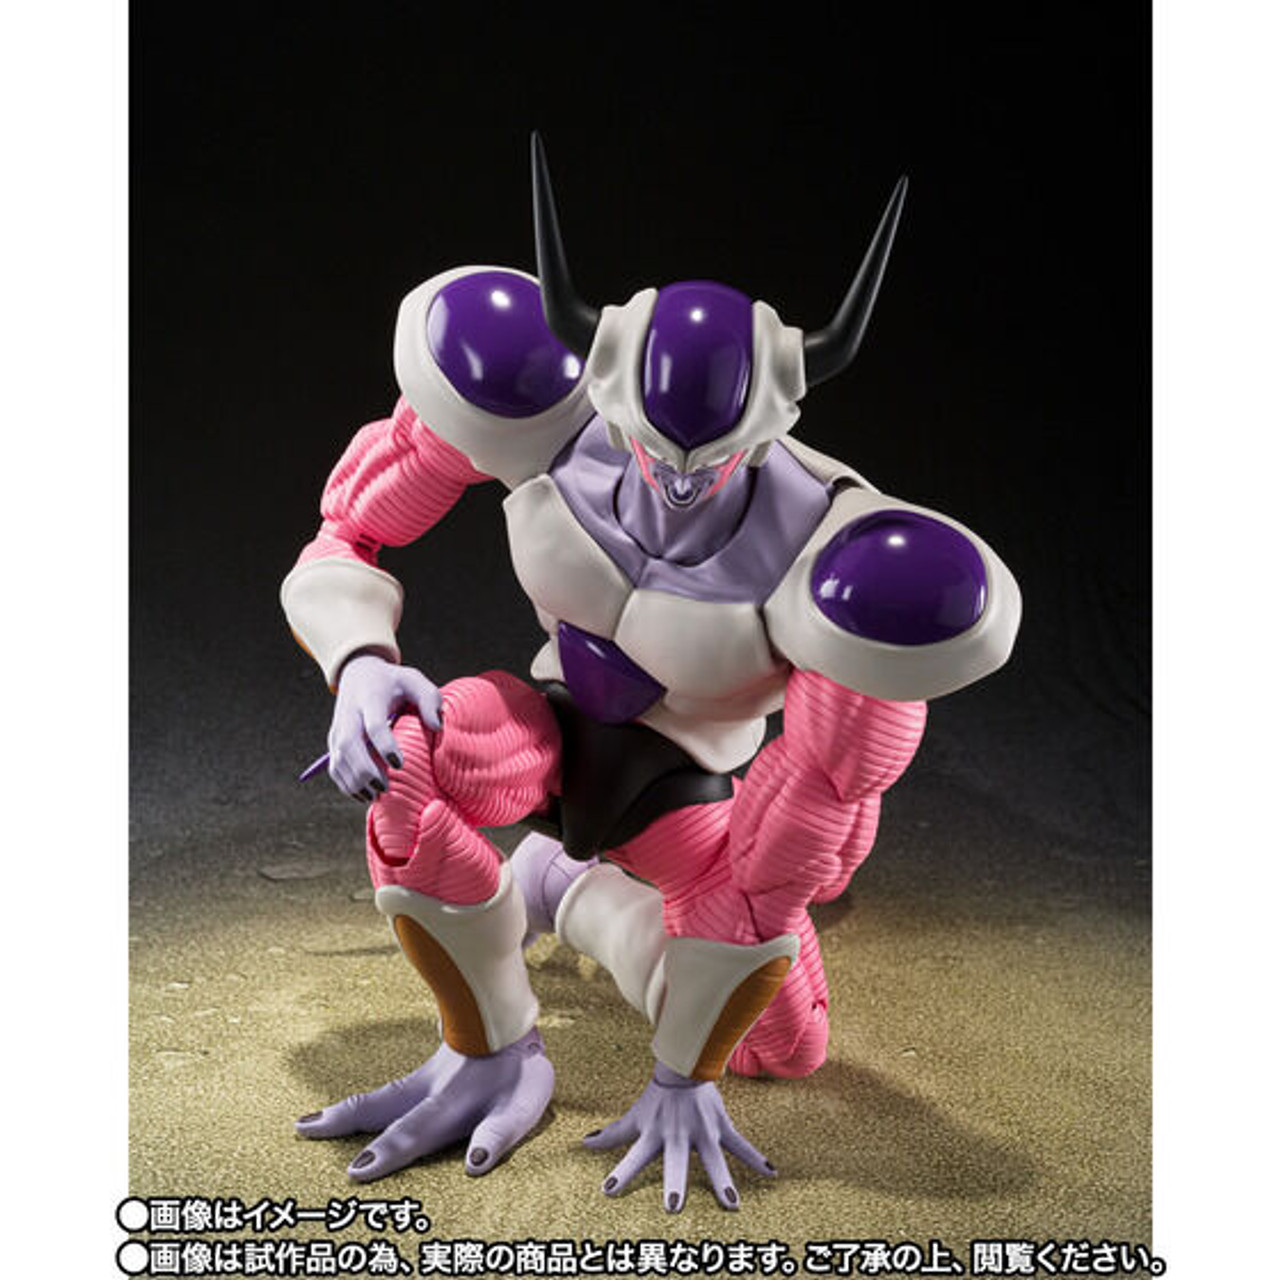 S.H.Figuarts Frieza Second Form Dragonball Z Action Figure